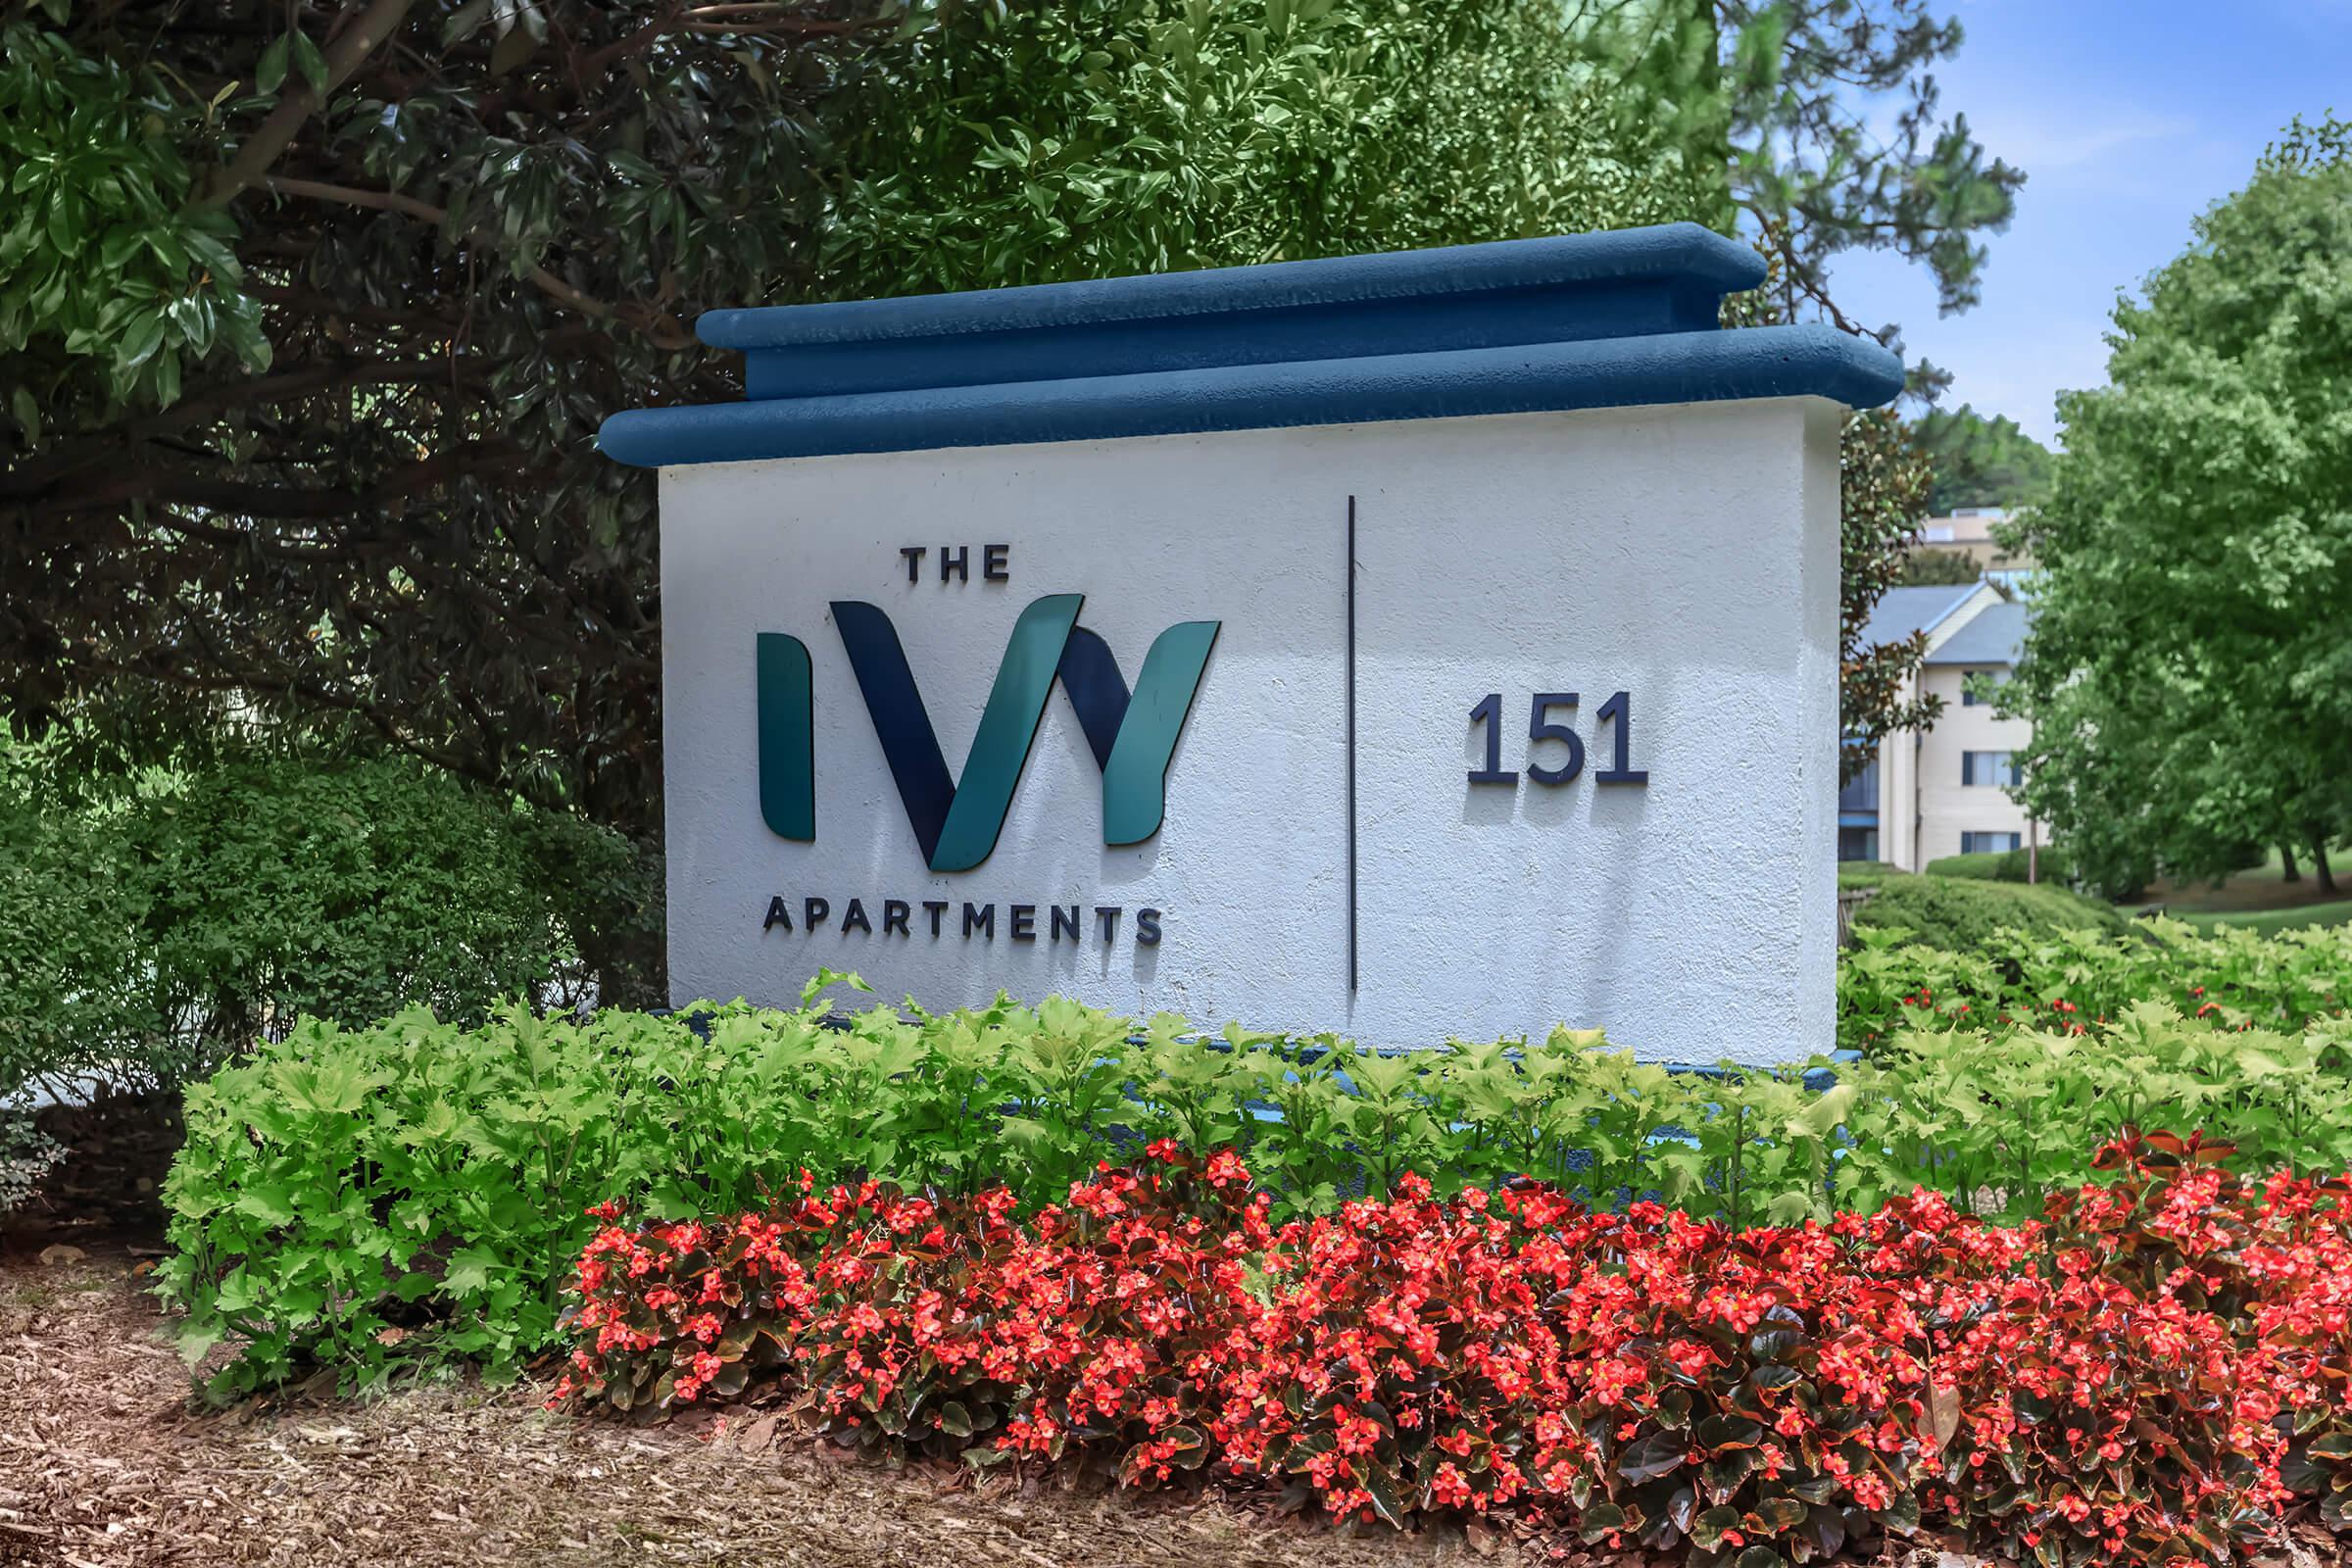 The Ivy Apartments Exterior - The Ivy Apartments - Greenville - South Carolina